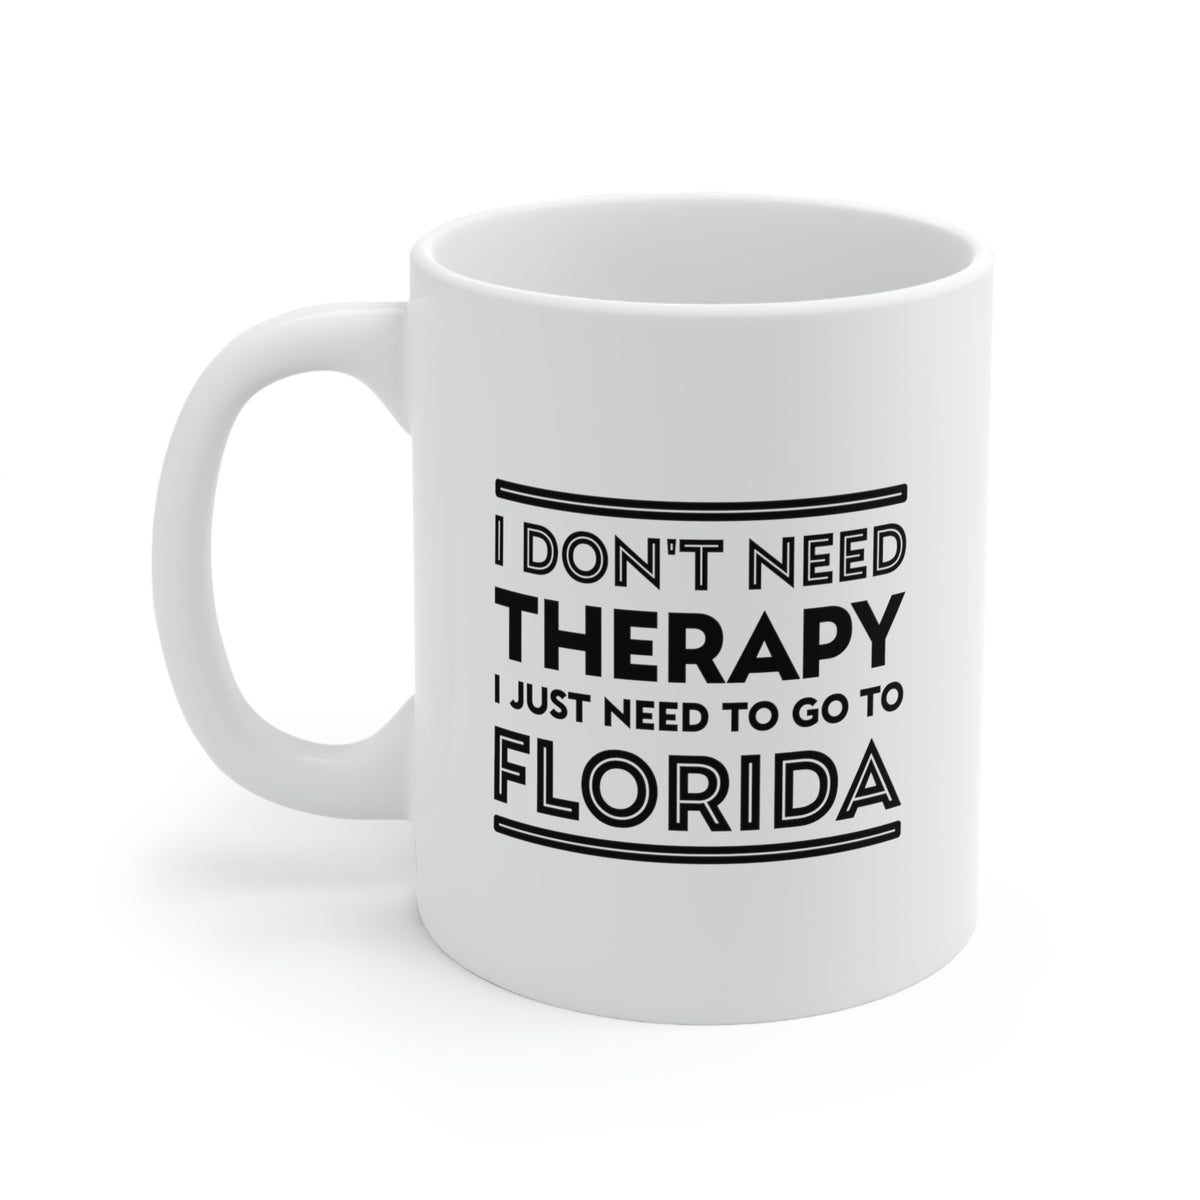 Florida Coffee Mug - I don't need therapy. I just need to go to - State Unique Funny Gifts For Men and Women